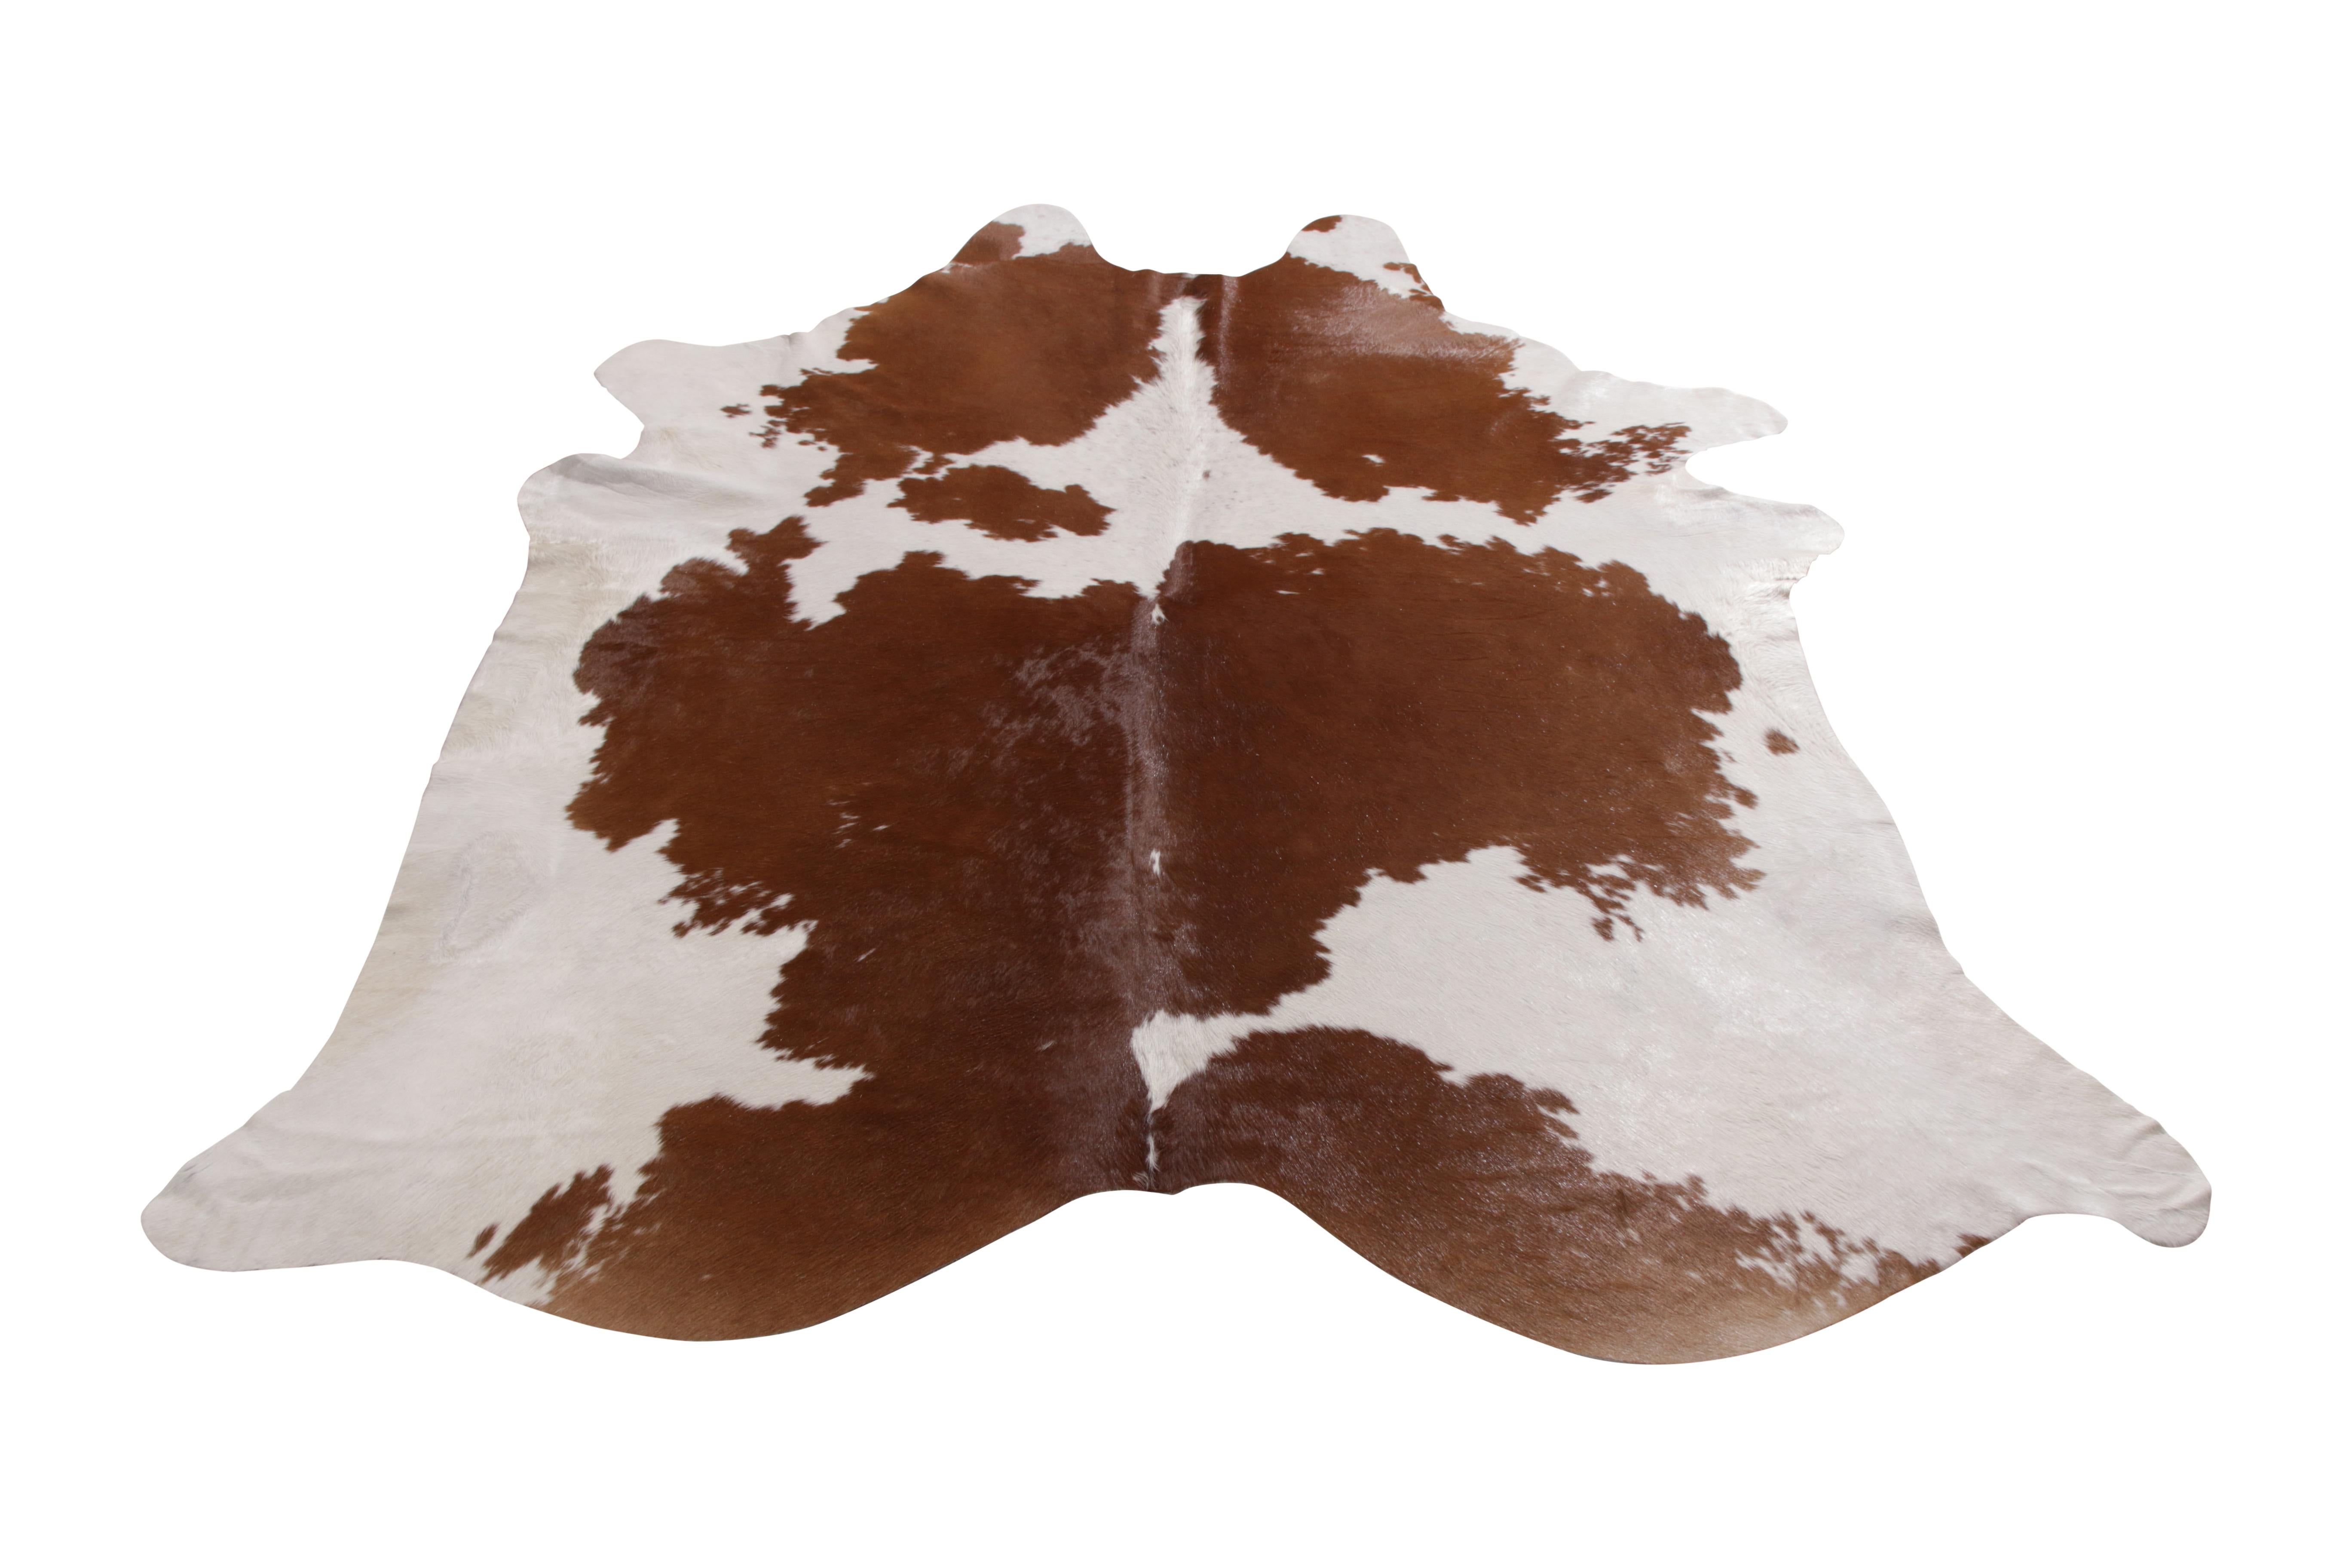 A 7 x 7 from Rug & Kilim’s line of handmade cowhide rugs. Enjoying a silky, lustrous sheen complementing the pallet of brown and white. A comfortable, textural choice, particularly well suited to country homes and rustic interiors.